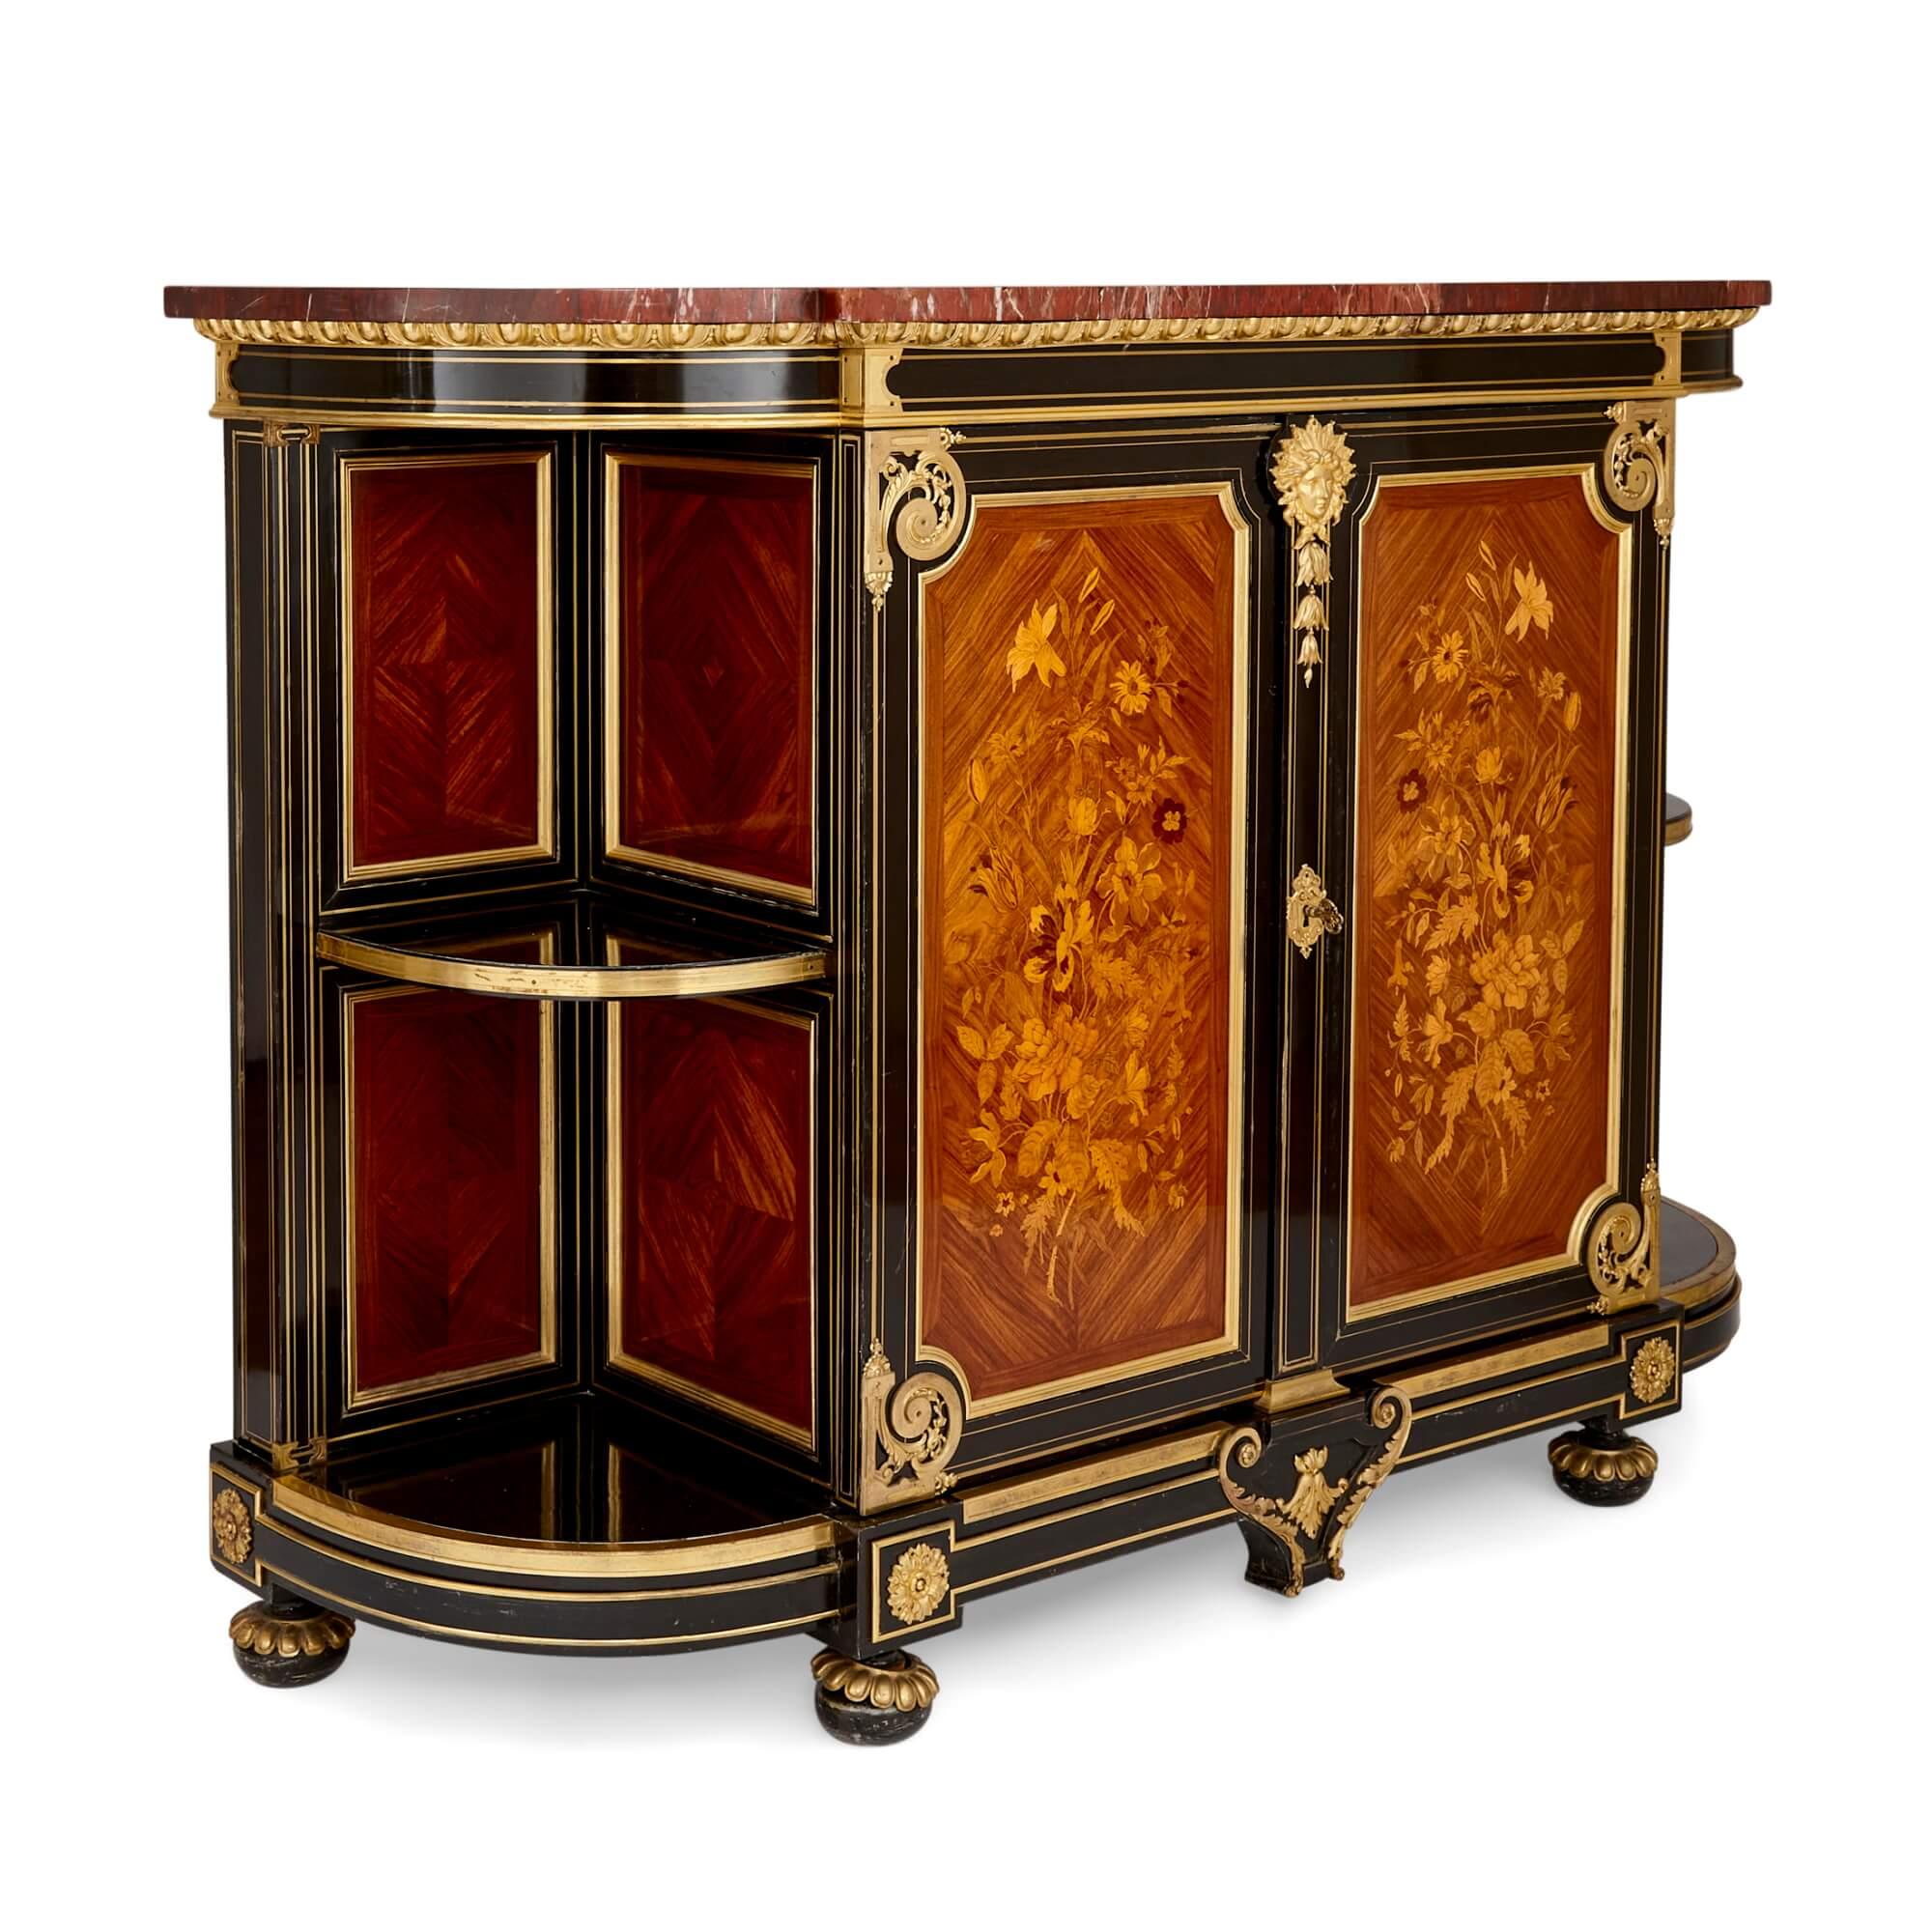 Antique French ormolu, brass and marquetry ebonised wood sideboard
French, c. 1870
Height 110cm, width 154cm, depth 49cm

Manufactured in France around 1870, this sideboard is wonderfully decorated using a wide array of complex techniques. 

The